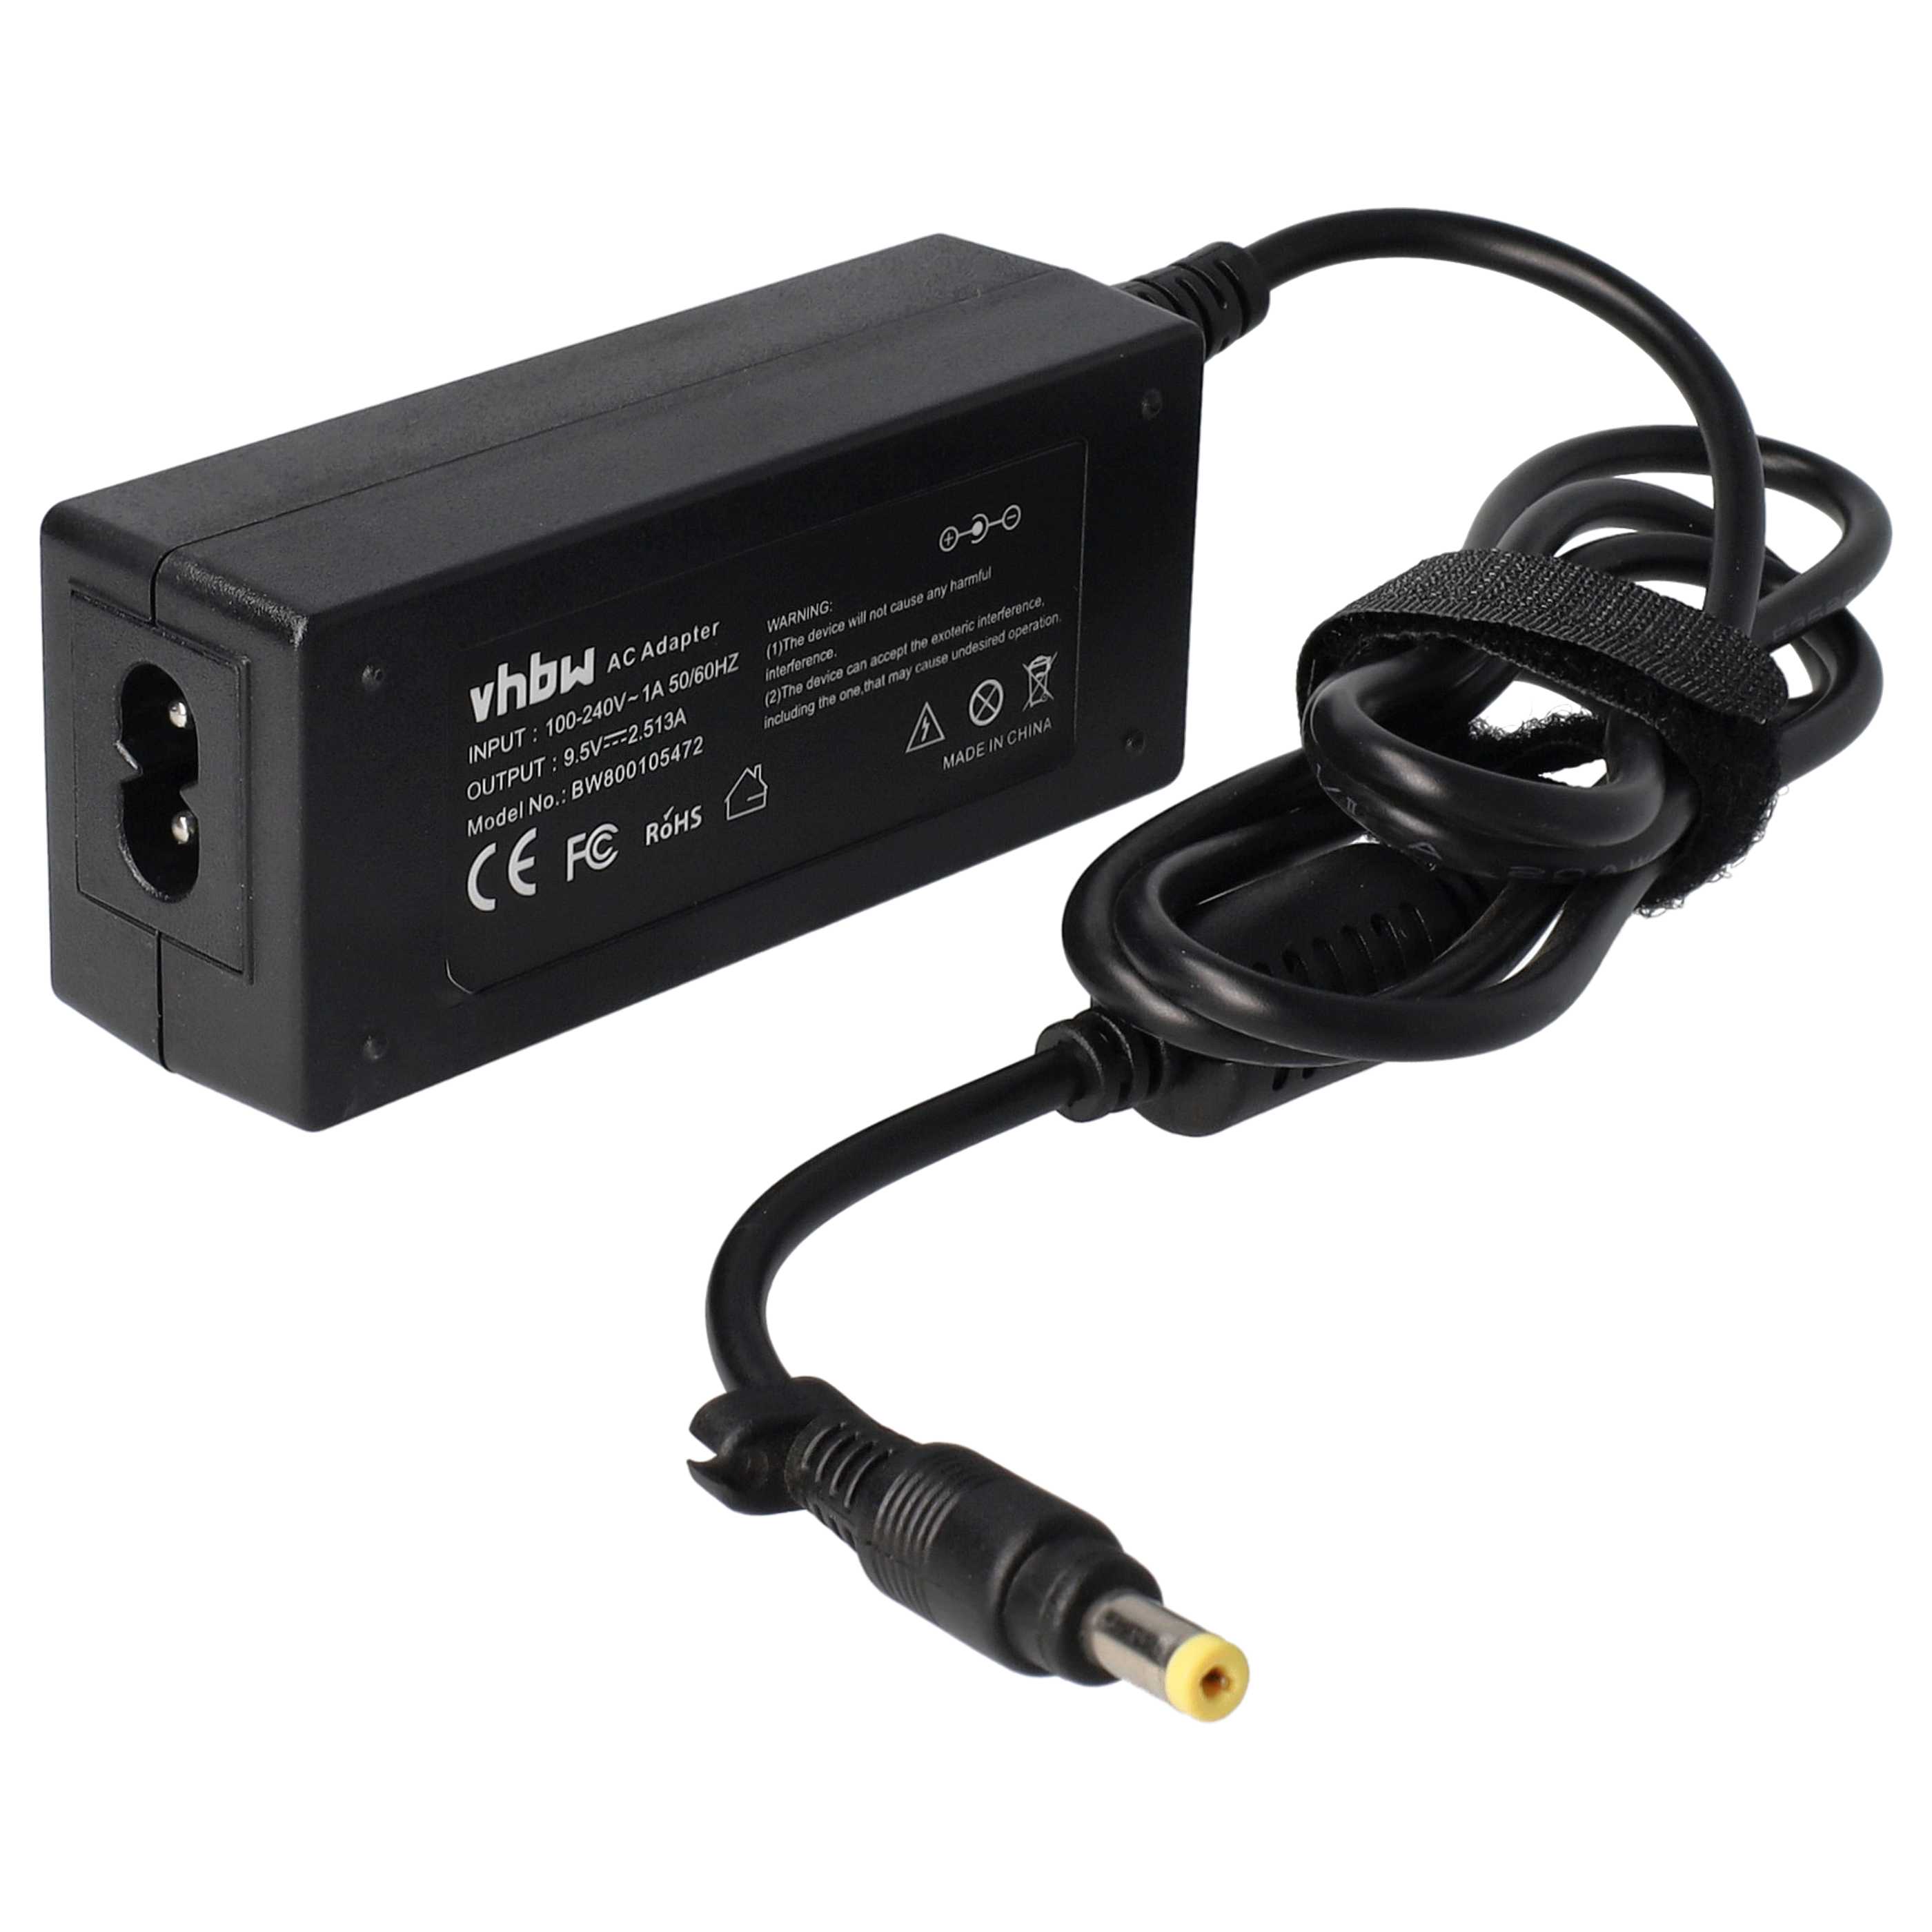 Alimentatore sostituisce Asus 24W-AS03, 90-OA00PW9100, AD59230 per notebook Asus , 24 W